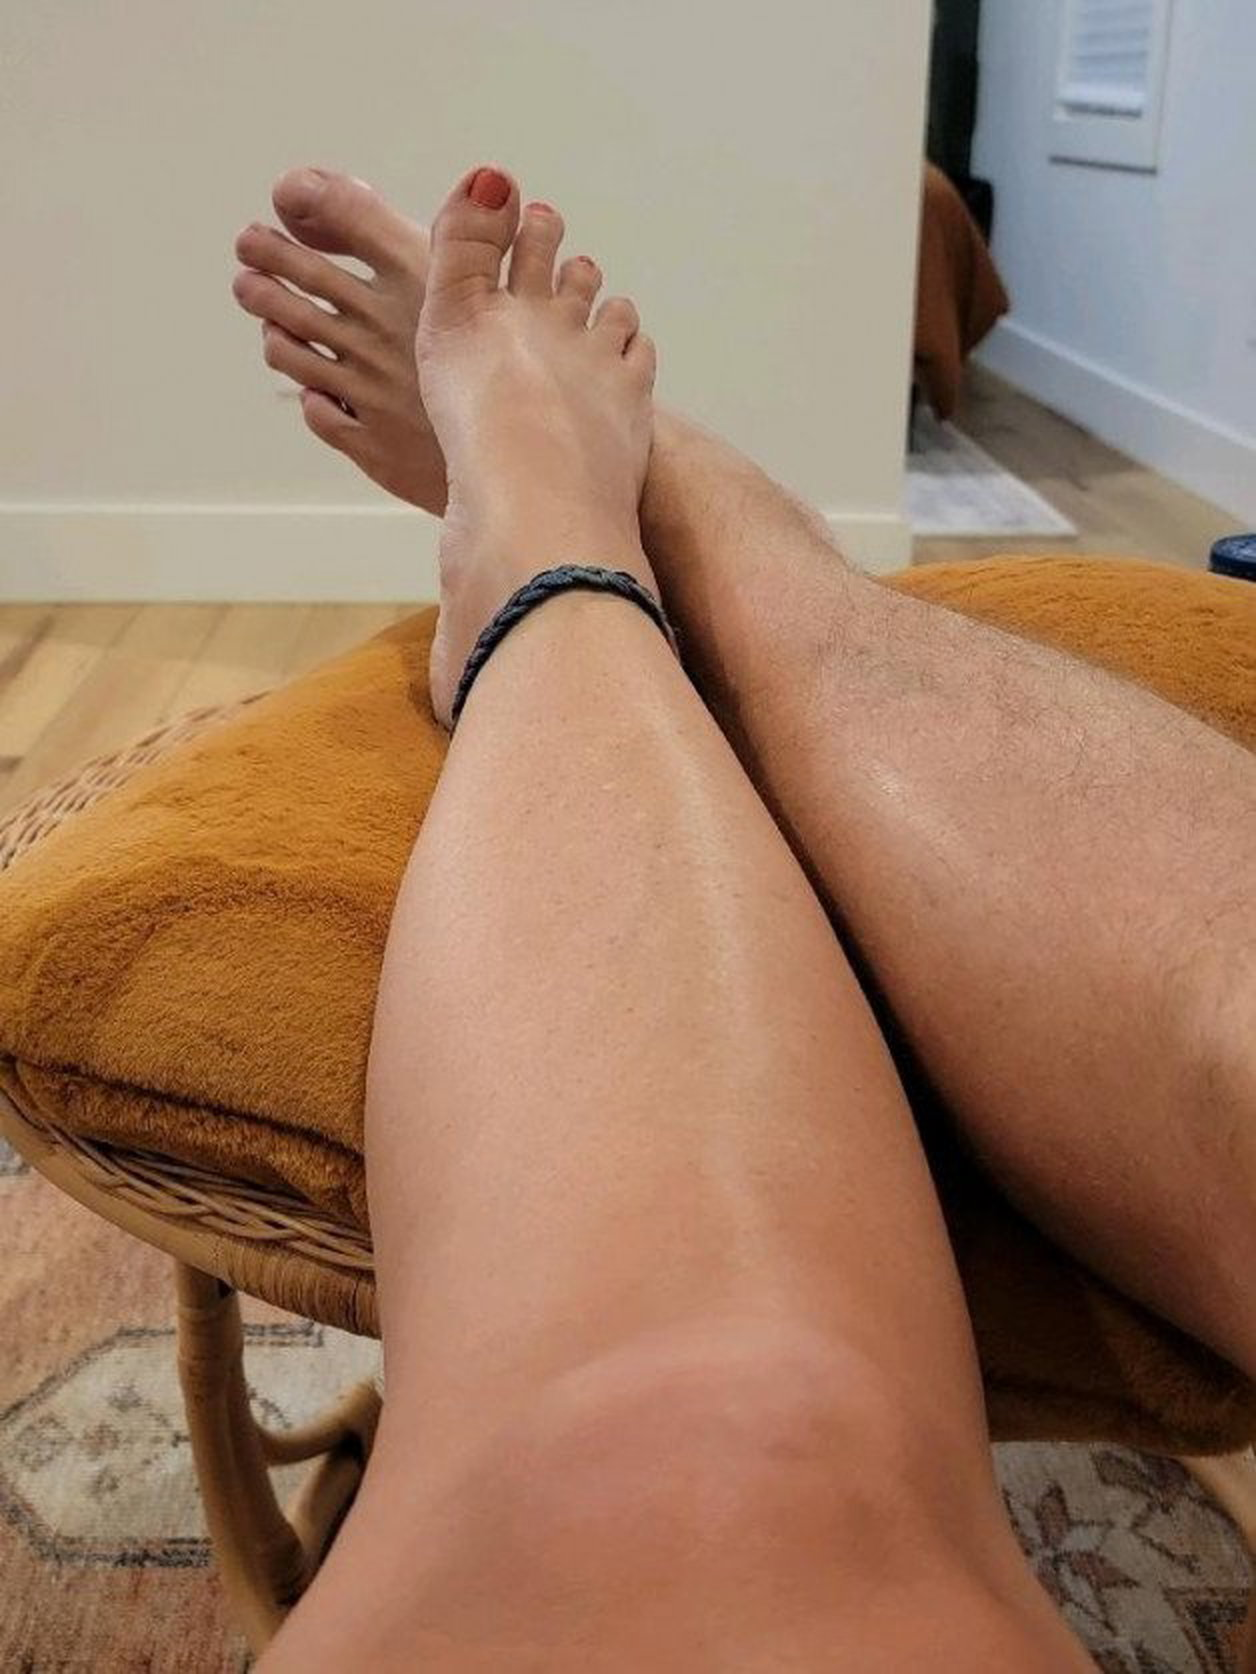 Photo by Aandcfromnc with the username @Aandcfromnc,  June 27, 2022 at 1:58 AM. The post is about the topic Sexy Feet and the text says 'She has some beautiful little feet!!!'